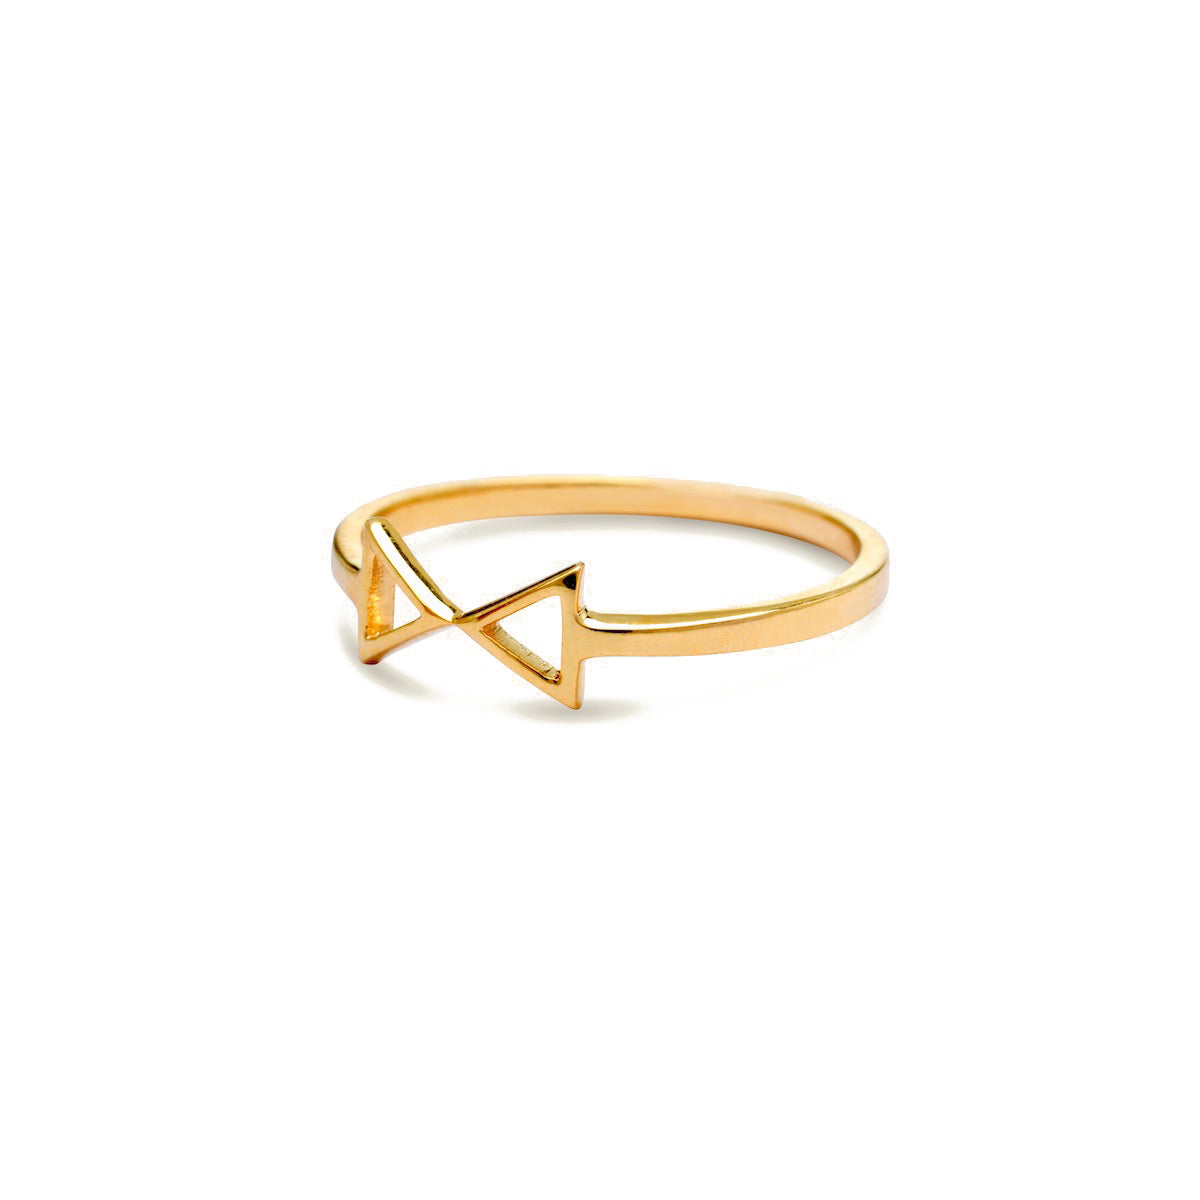 Gold bow ring for women,  Jewelry for girlfriend, minimalist jewellery, real gold jewelry